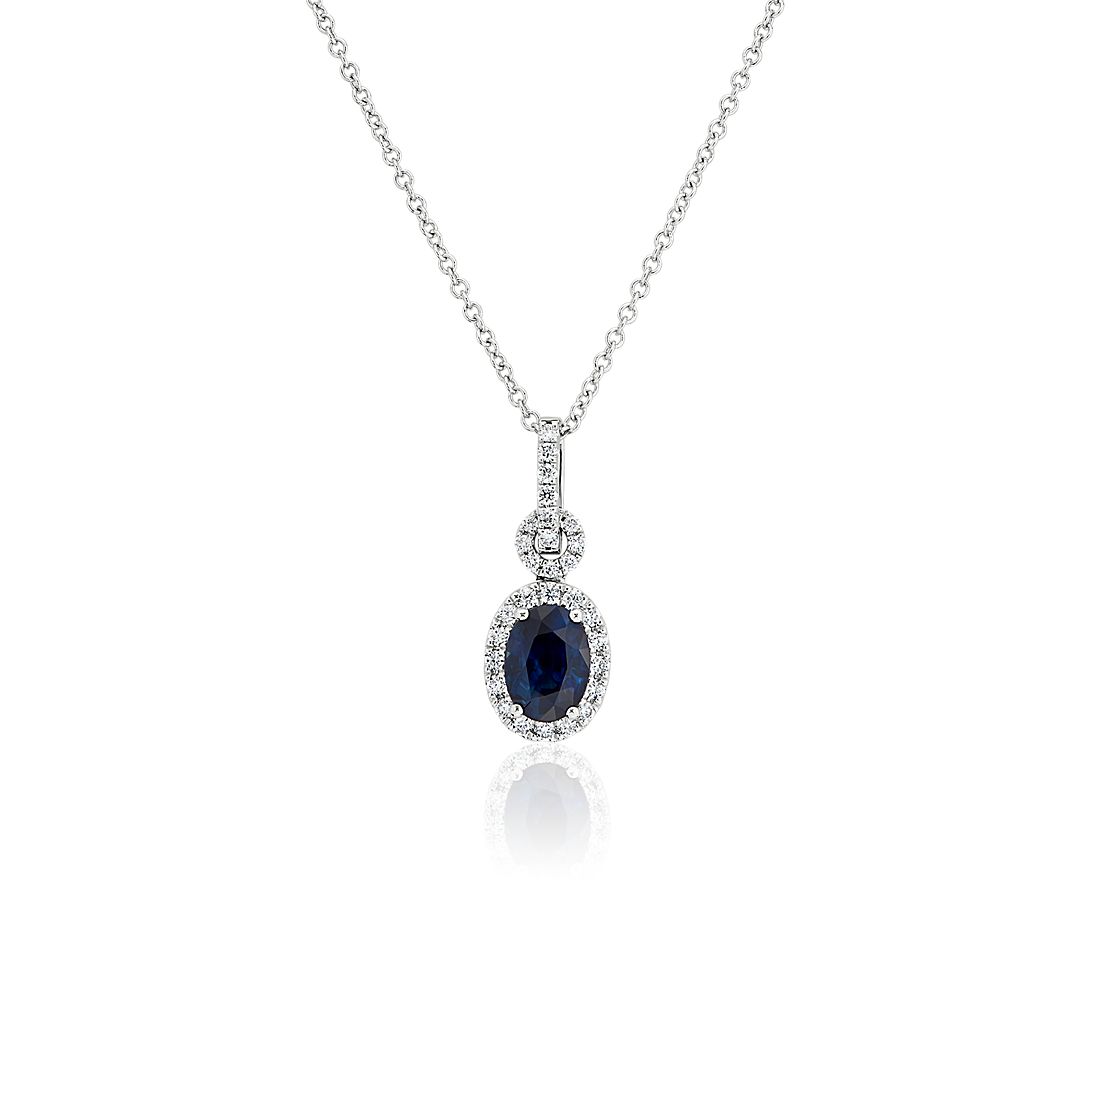 Oval Sapphire Pendant with Diamond Bail in 14k White Gold